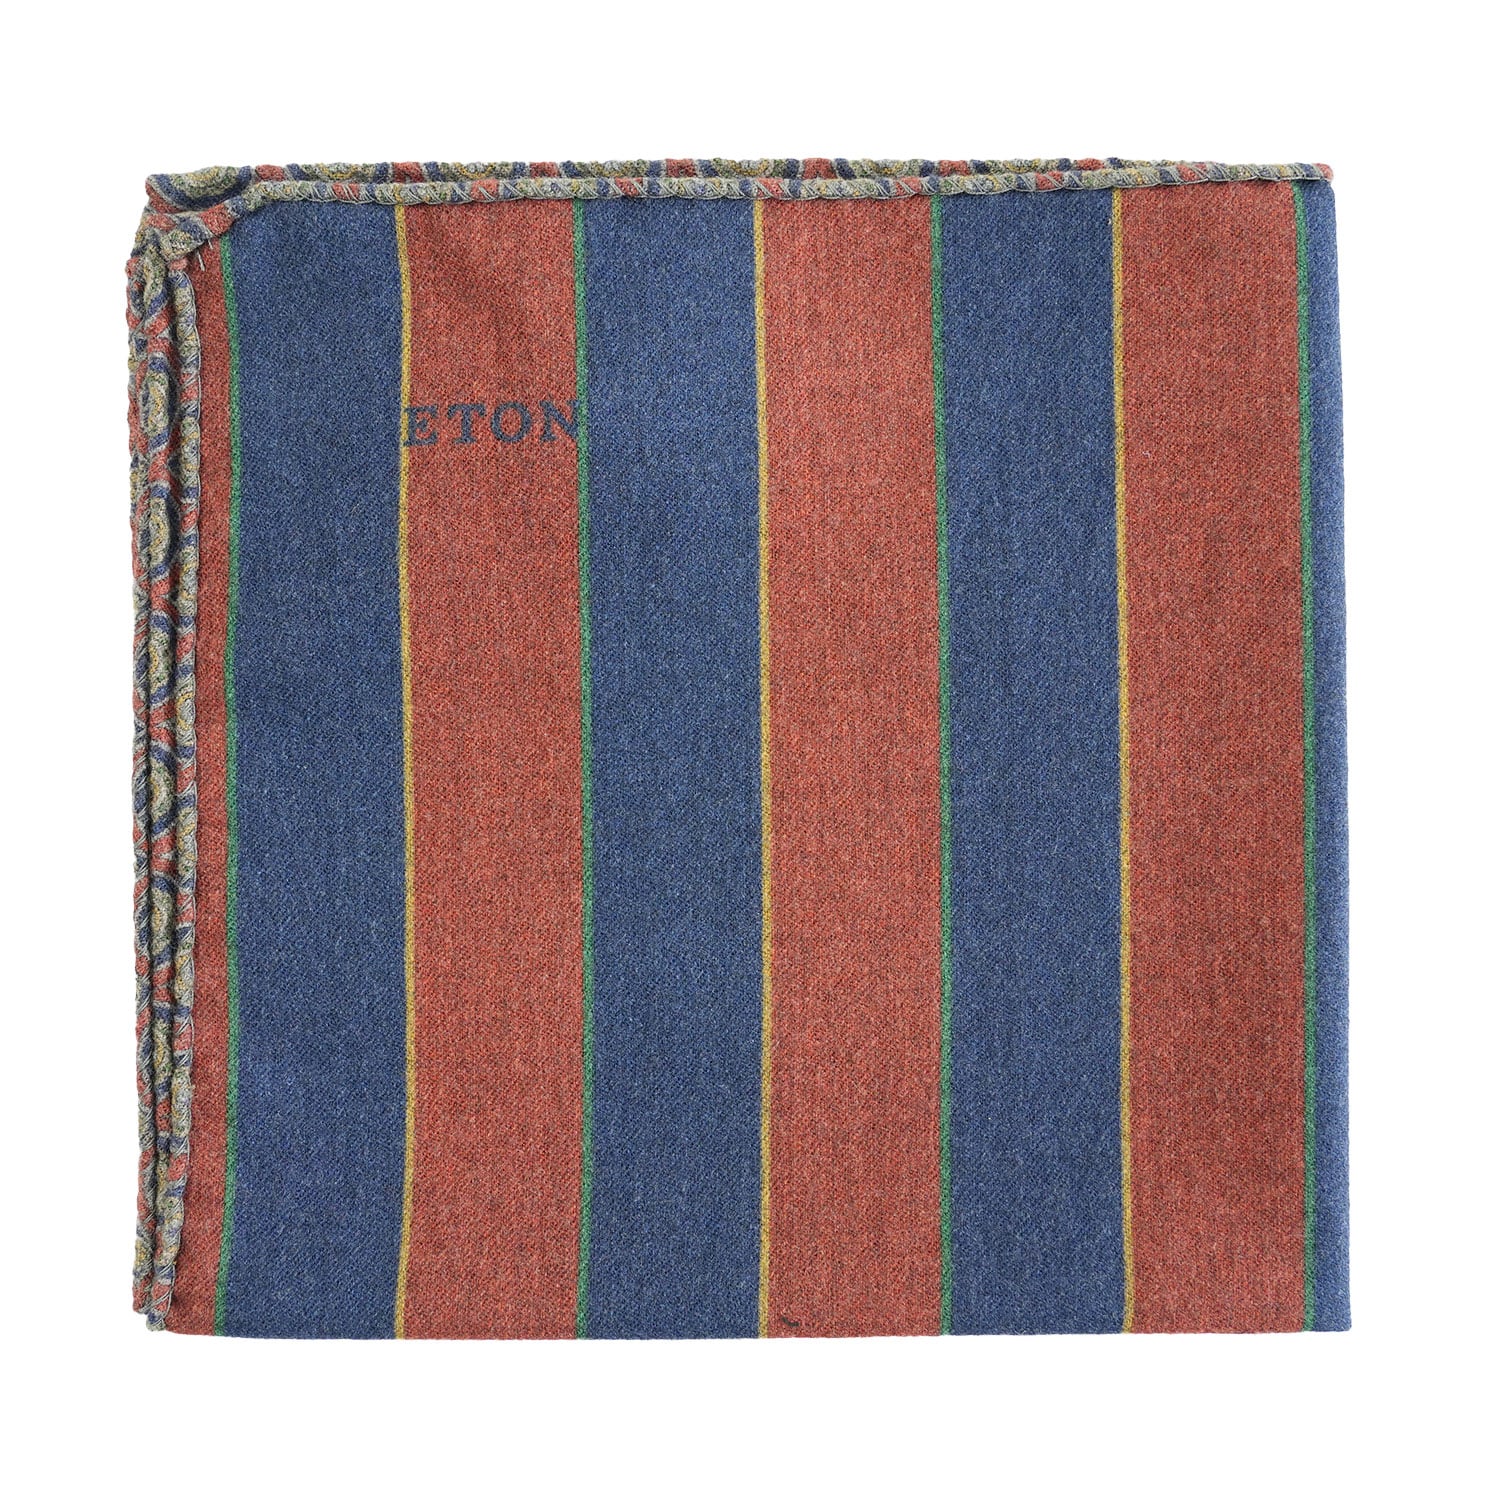 Eton striped blue and red pocket square